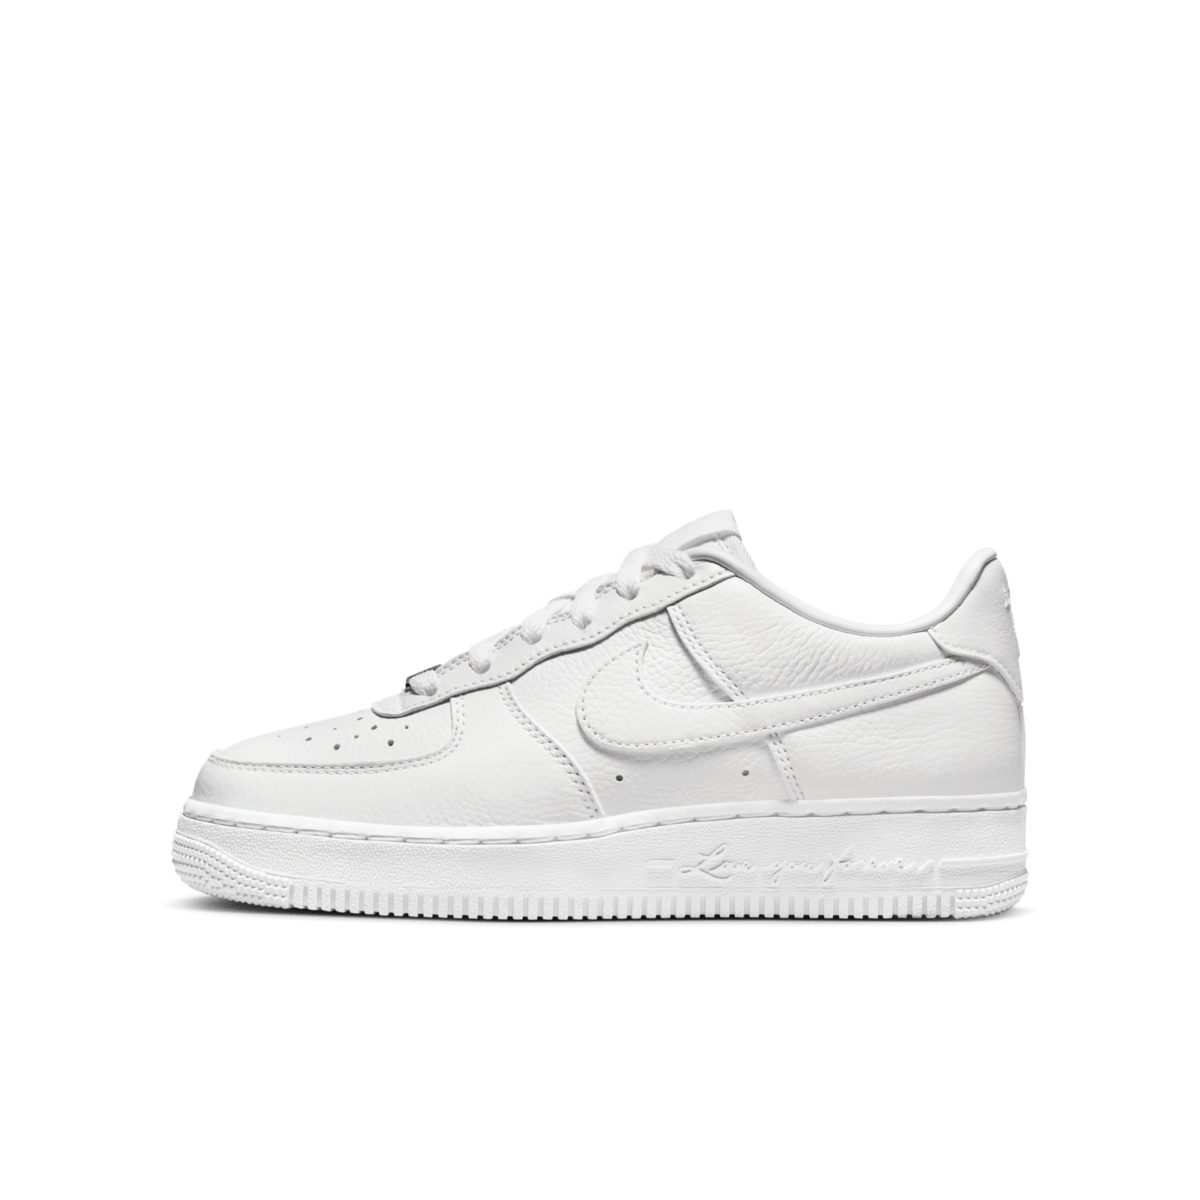 NOCTA x Nike Air Force 1 Low GS 'Love You Forever' FV9918-100